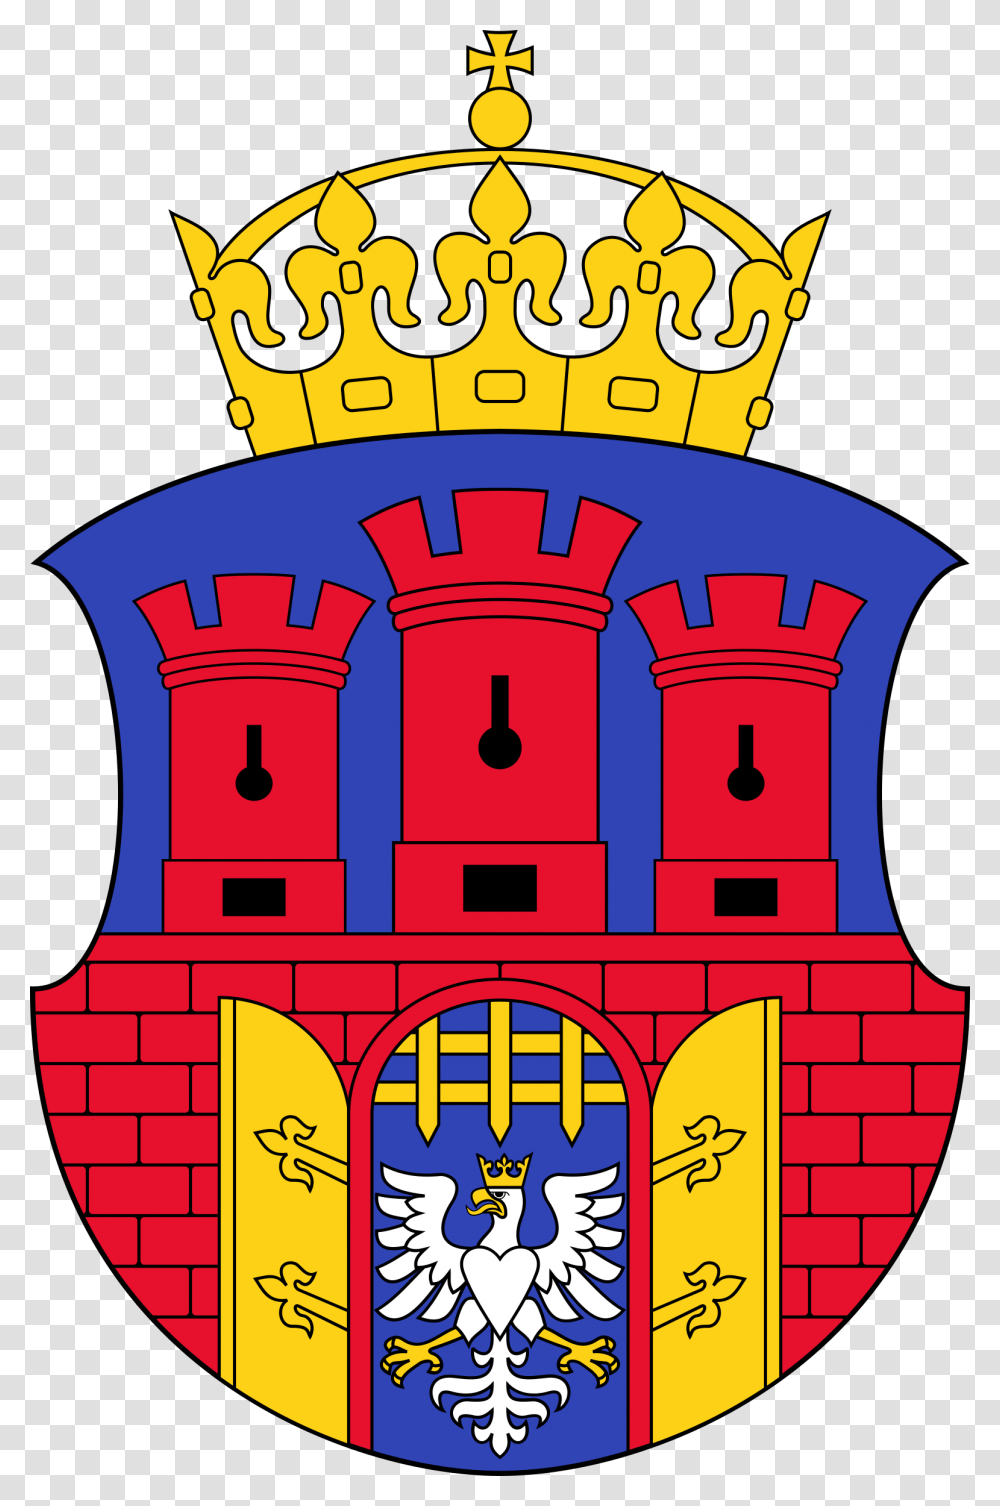 Coat Of Arms Of Cracow Clip Arts Coat Of Arms Cracovia, Building, Architecture, Pac Man Transparent Png